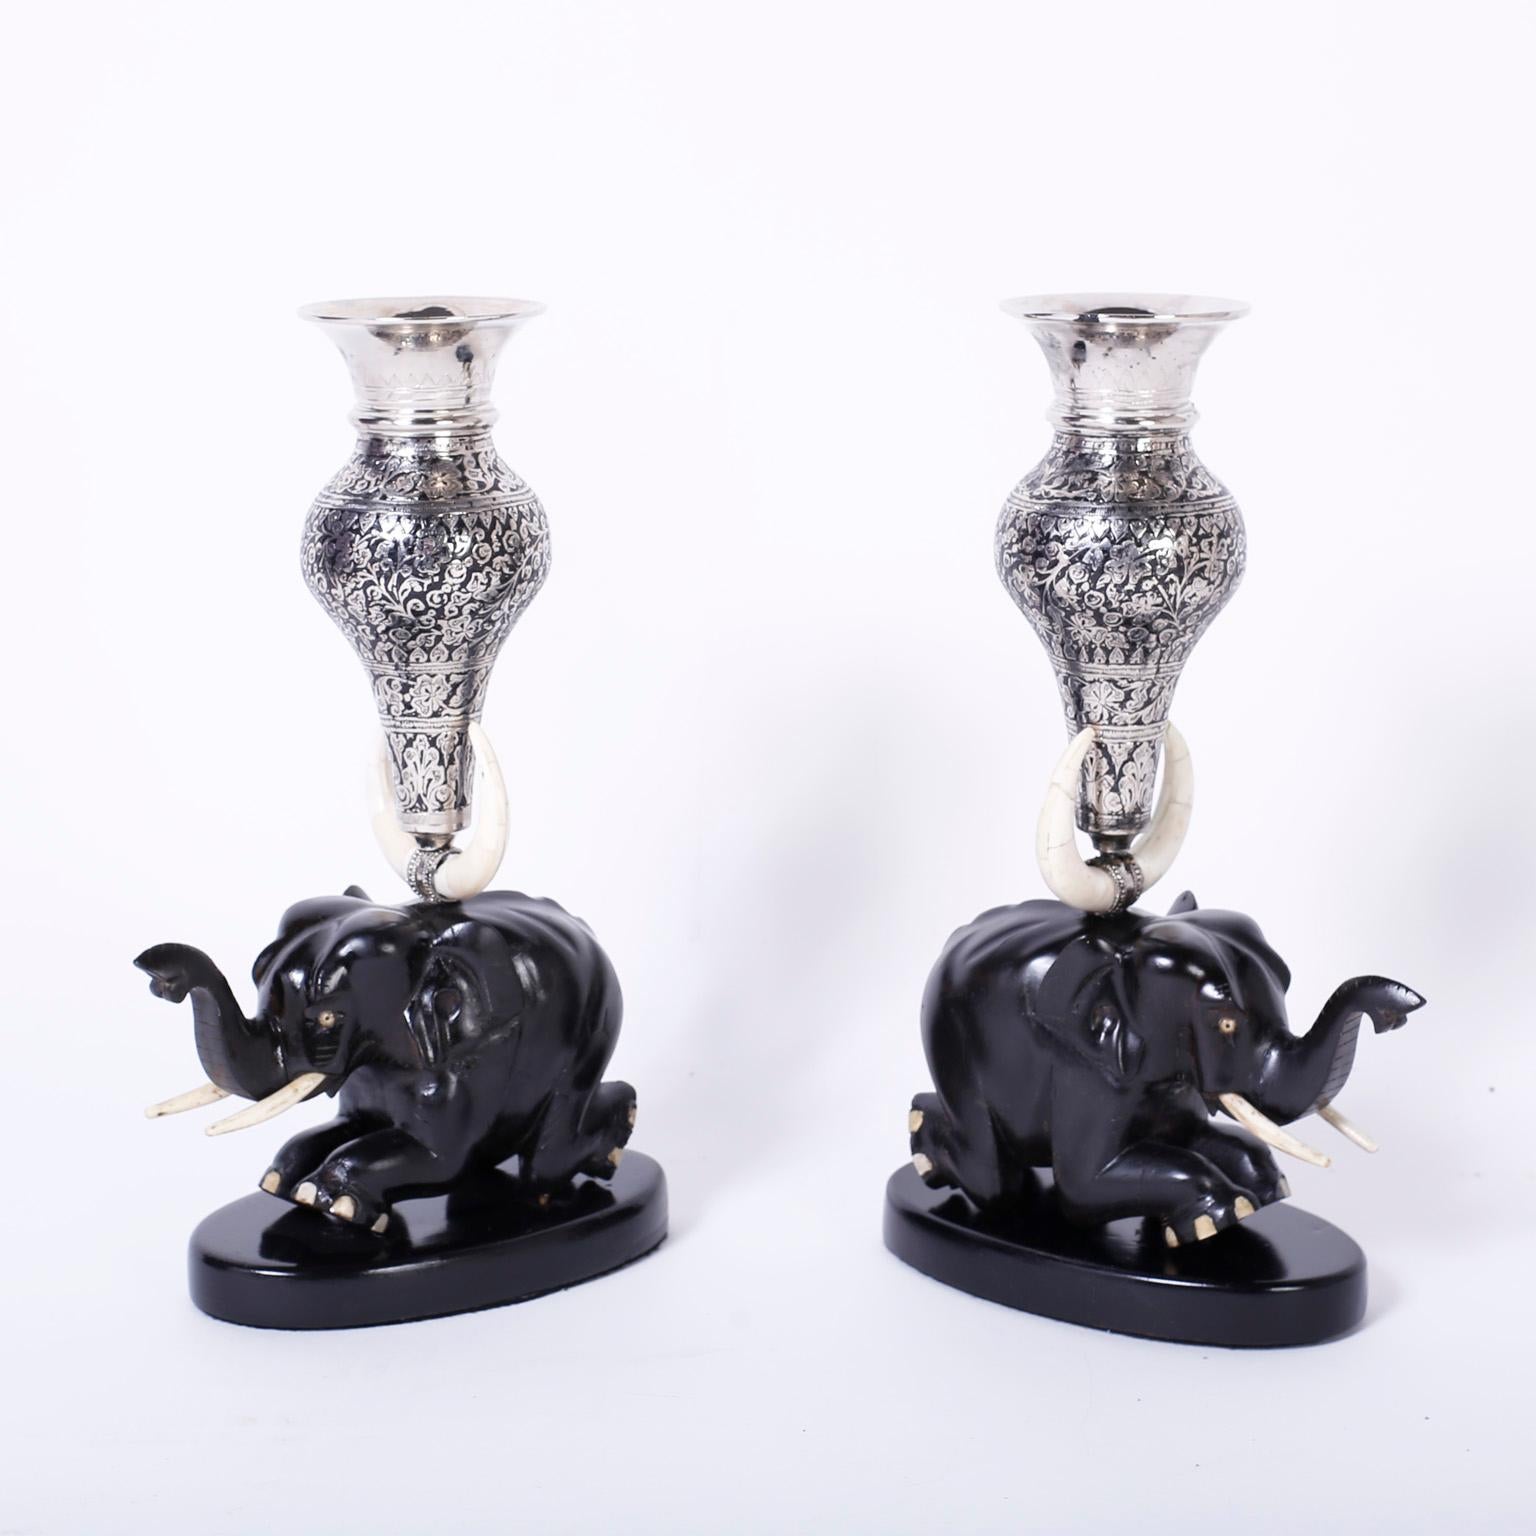 Fanciful antique Anglo-Indian vases with silver metal vessels hand tooled with floral designs mounted on carved ebony kneeling elephants enhanced with bone details.